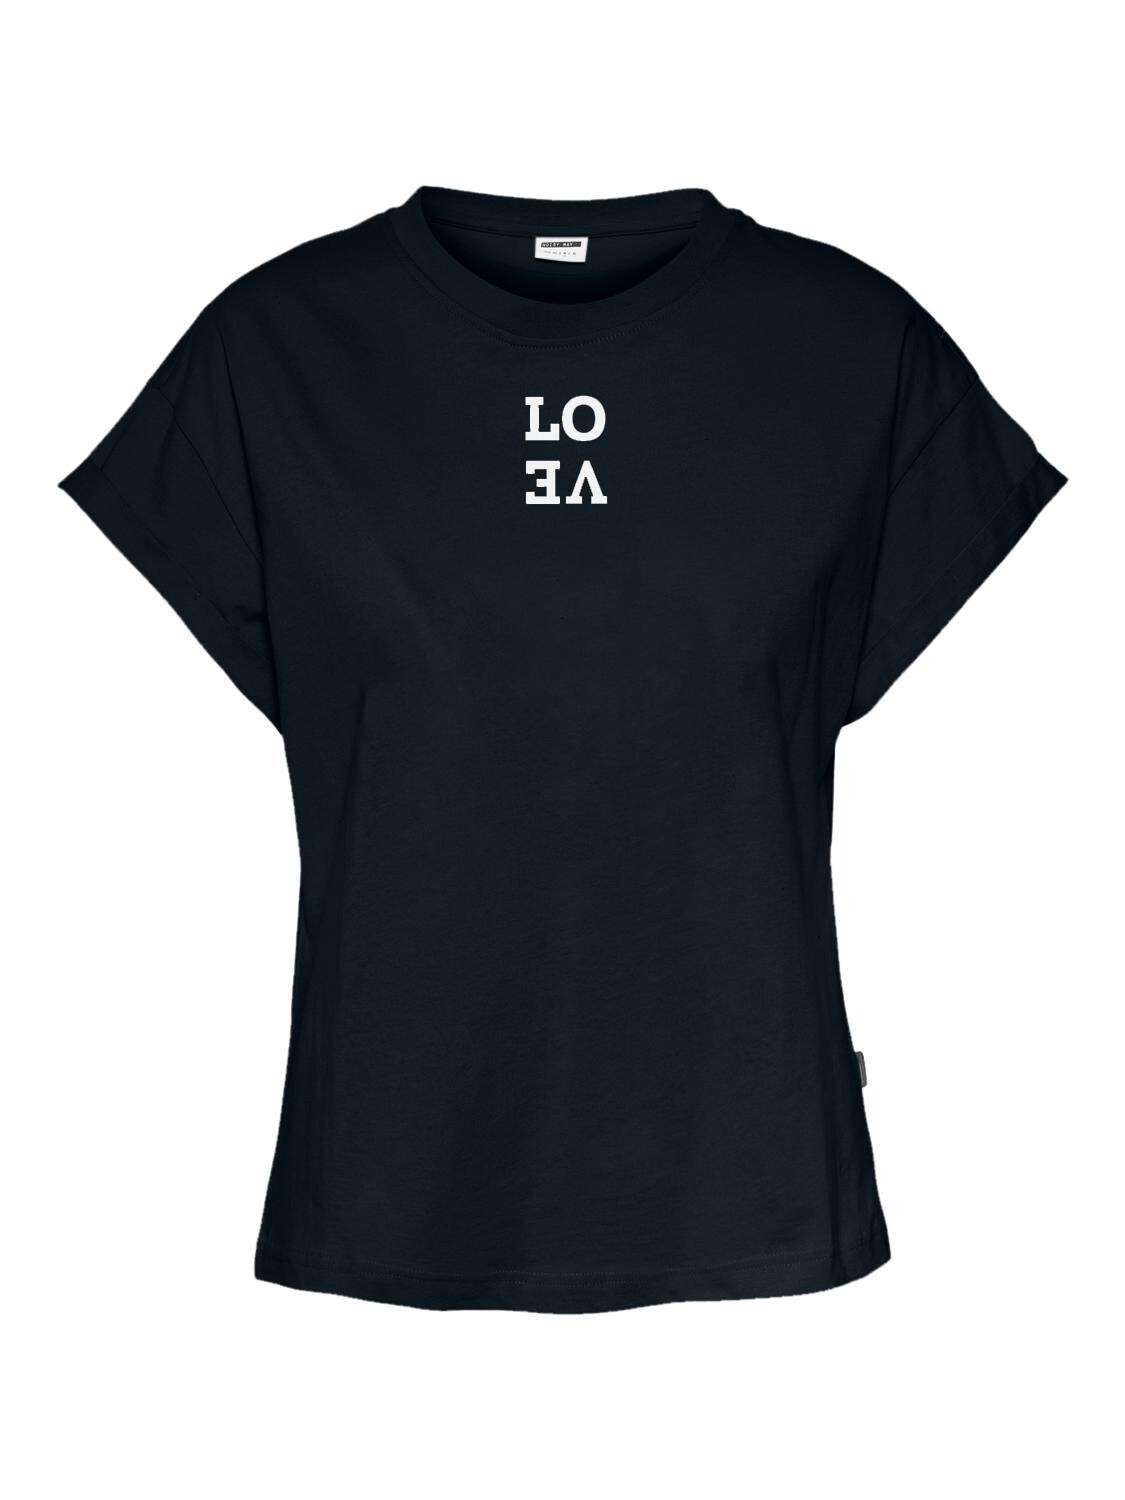 NMABBIE QUOTE S/S O-NECK T-SHIRT Black-LOVE